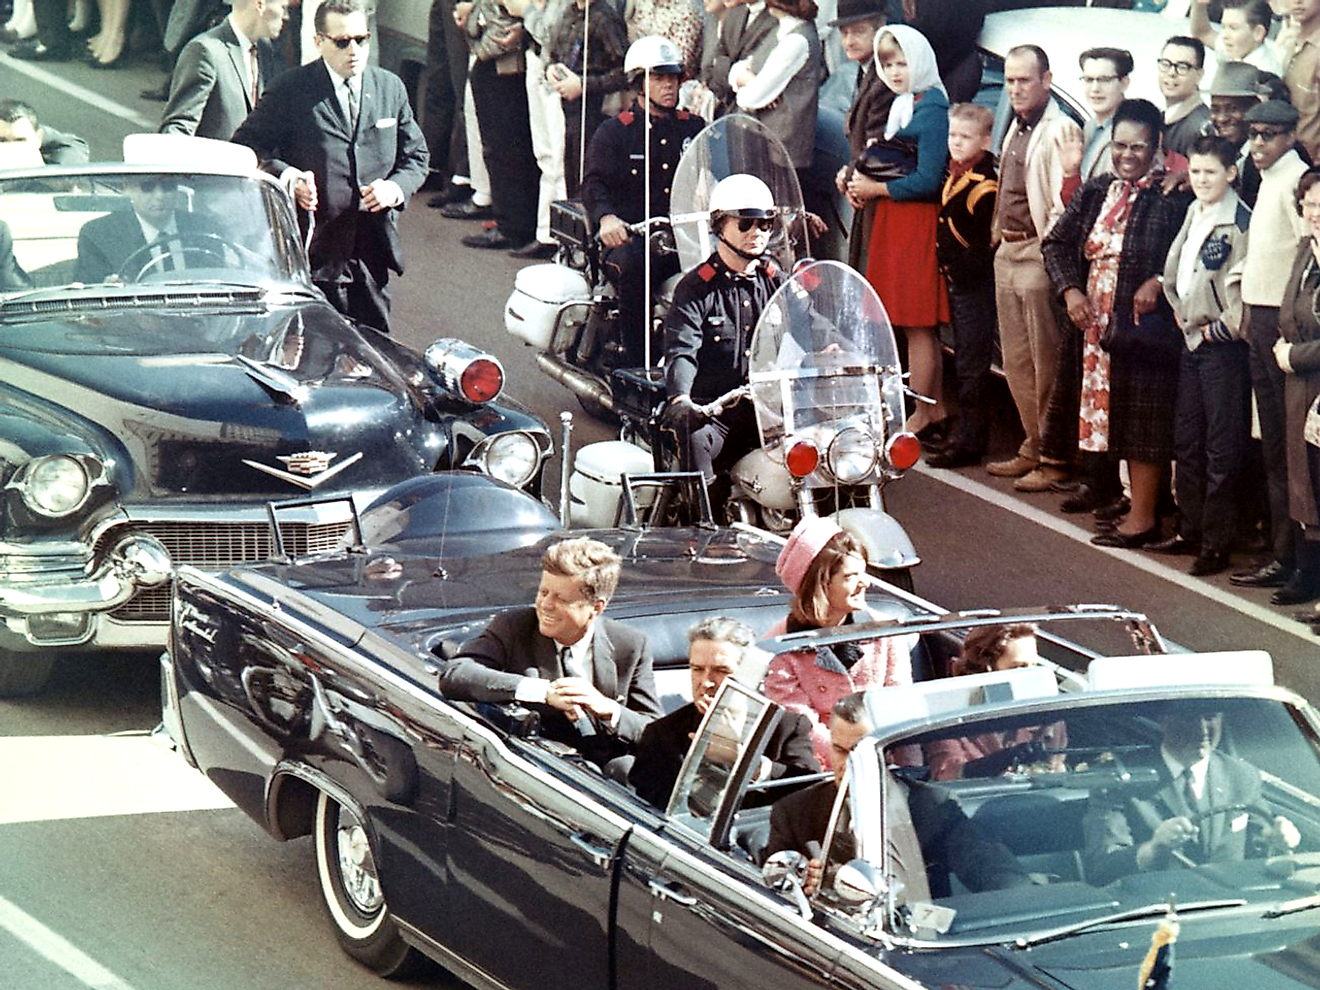 Picture of President Kennedy in the limousine in Dallas, Texas, on Main Street, minutes before the assassination. Image credit: Walt Cisco, Dallas Morning News/Public domain